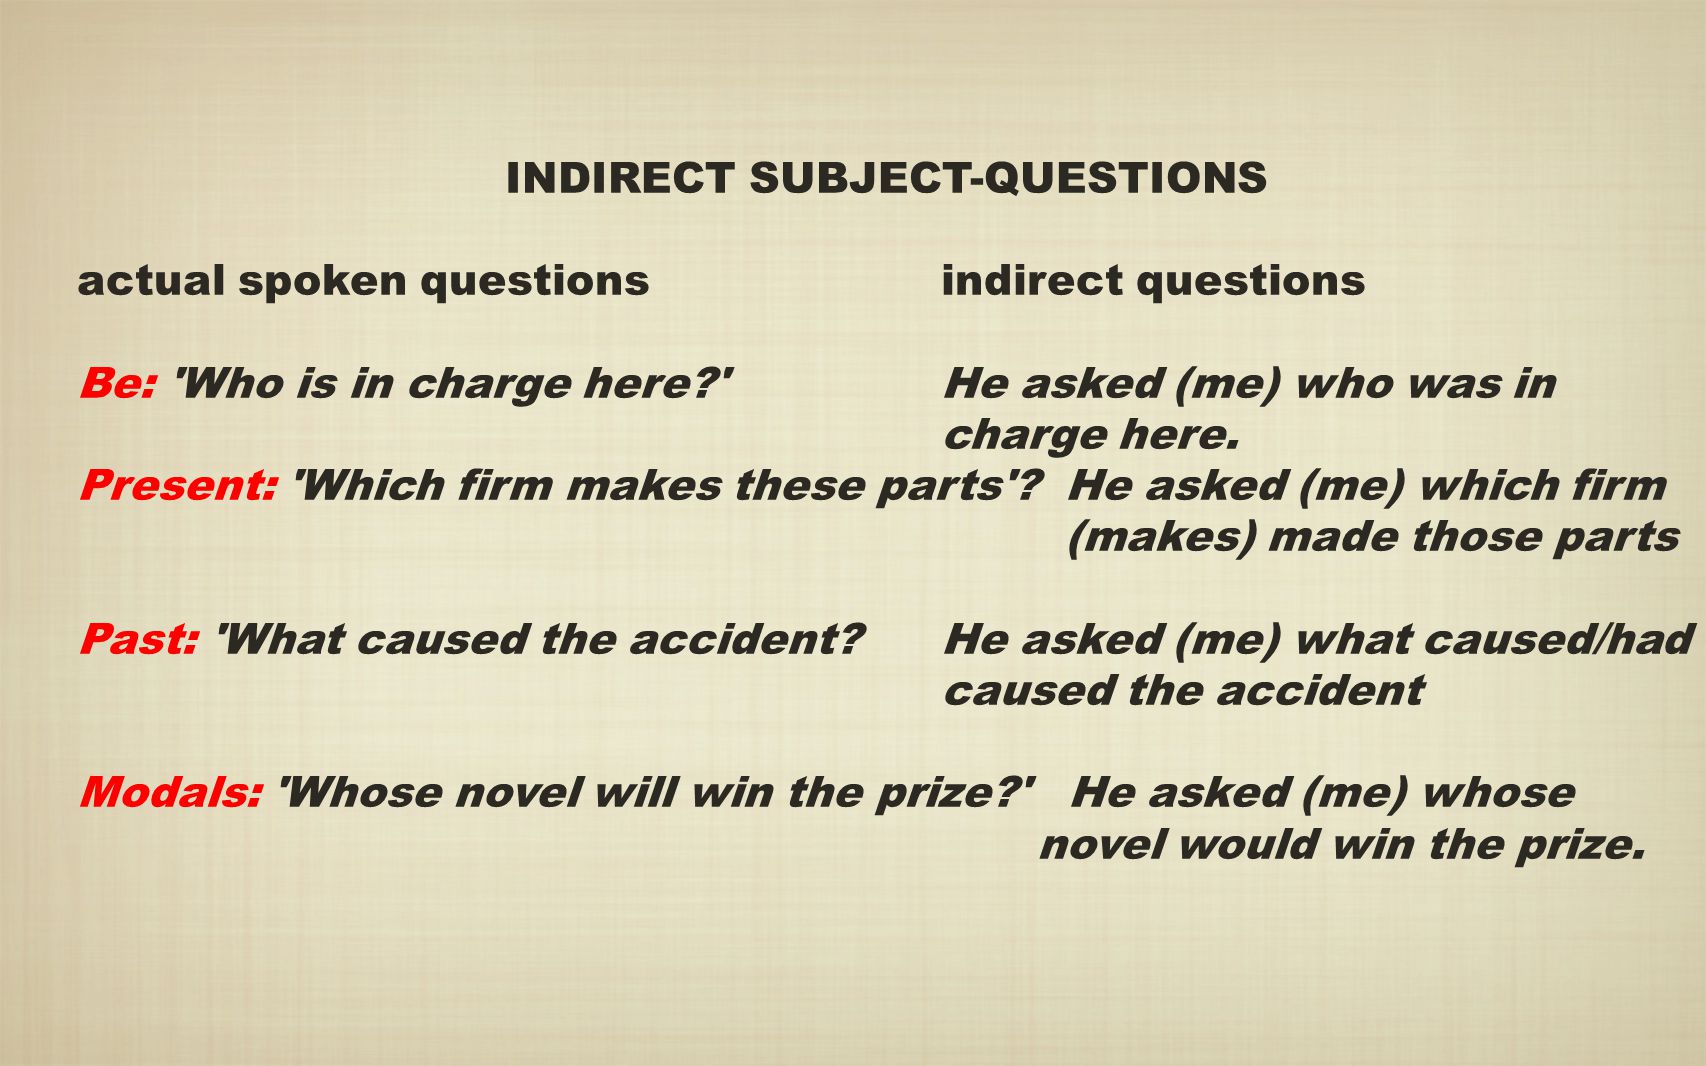 INDIRECT SUBJECT-QUESTIONS